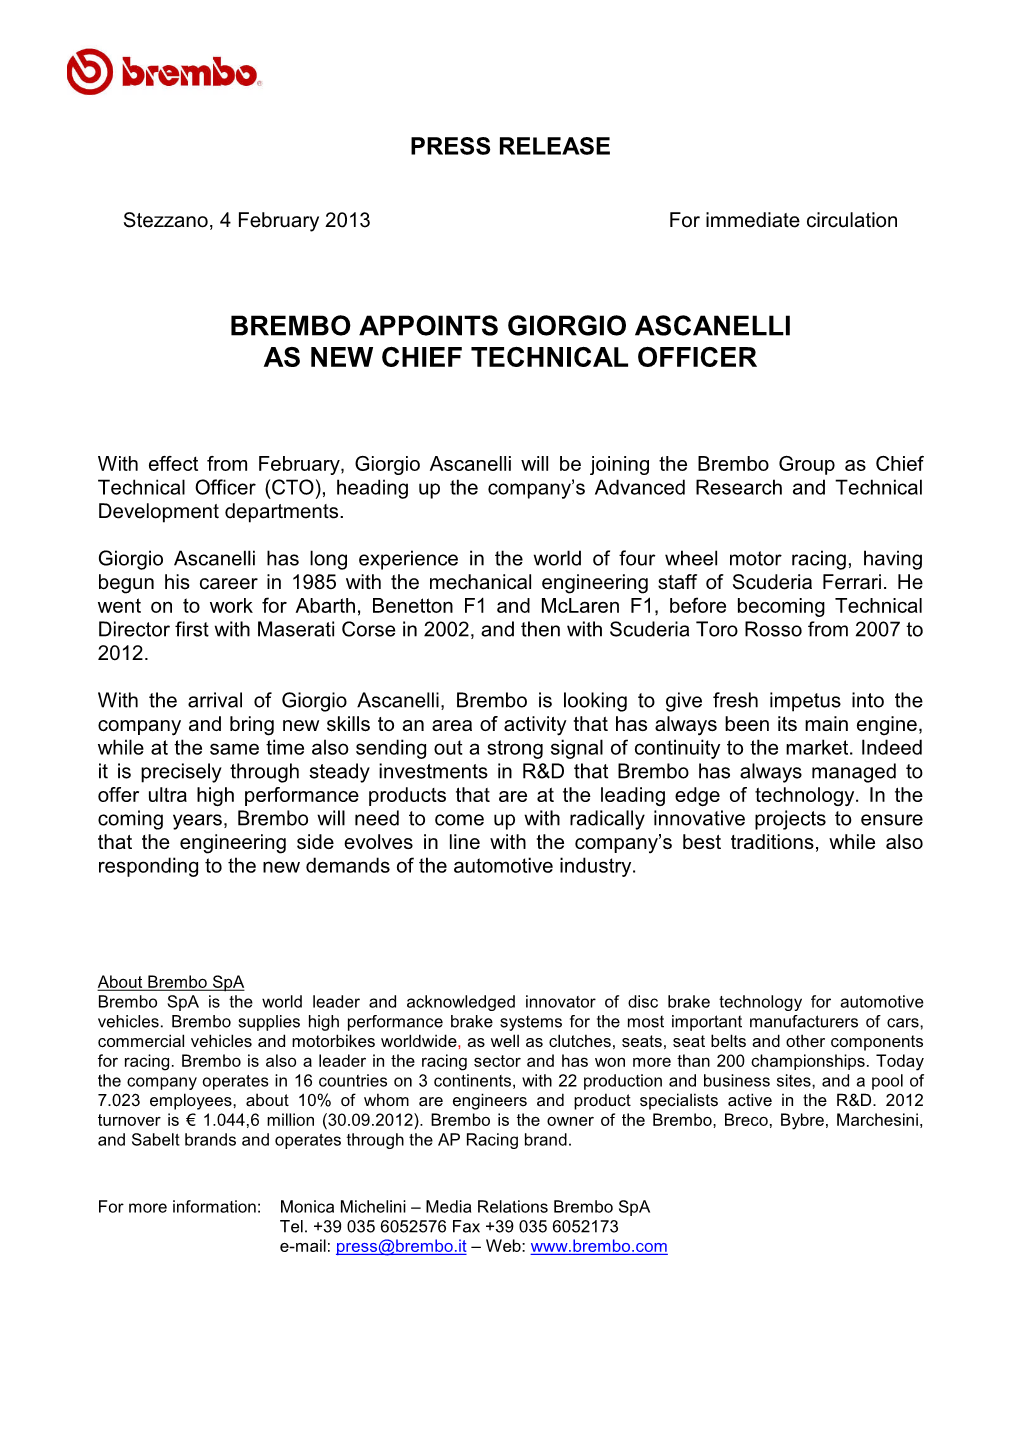 Brembo Appoints Giorgio Ascanelli As New Chief Technical Officer